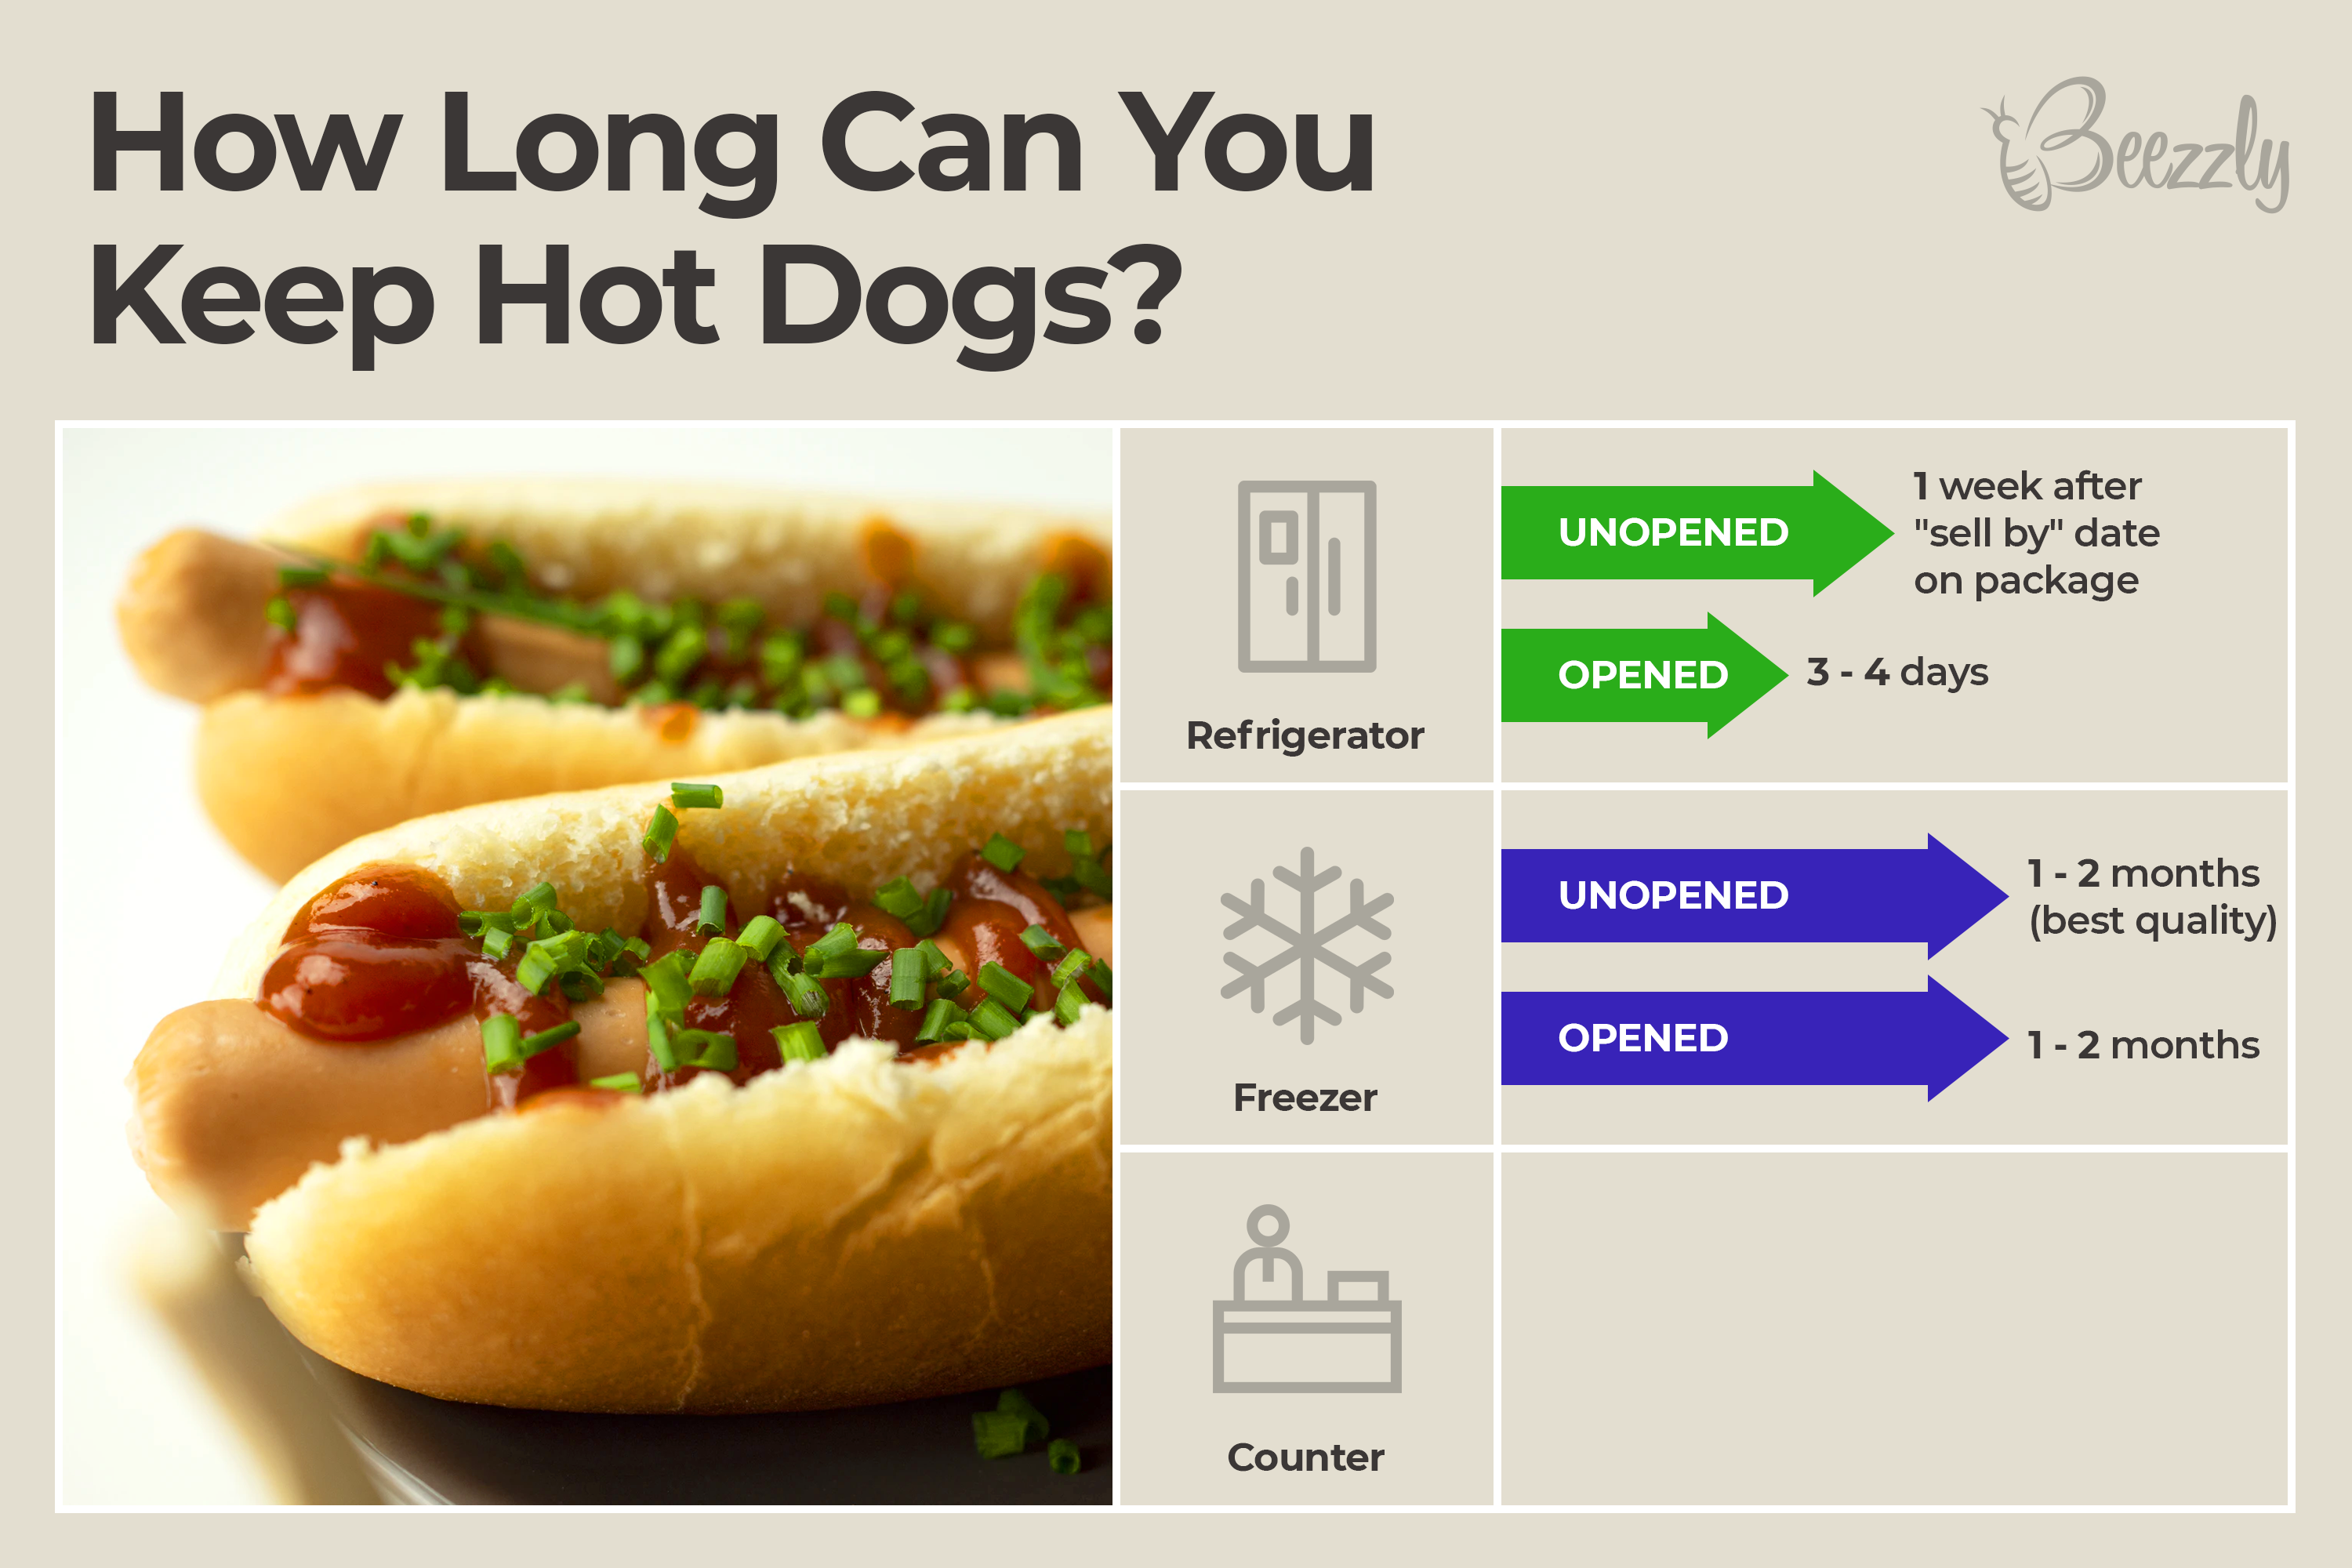 How long can you keep hot dogs